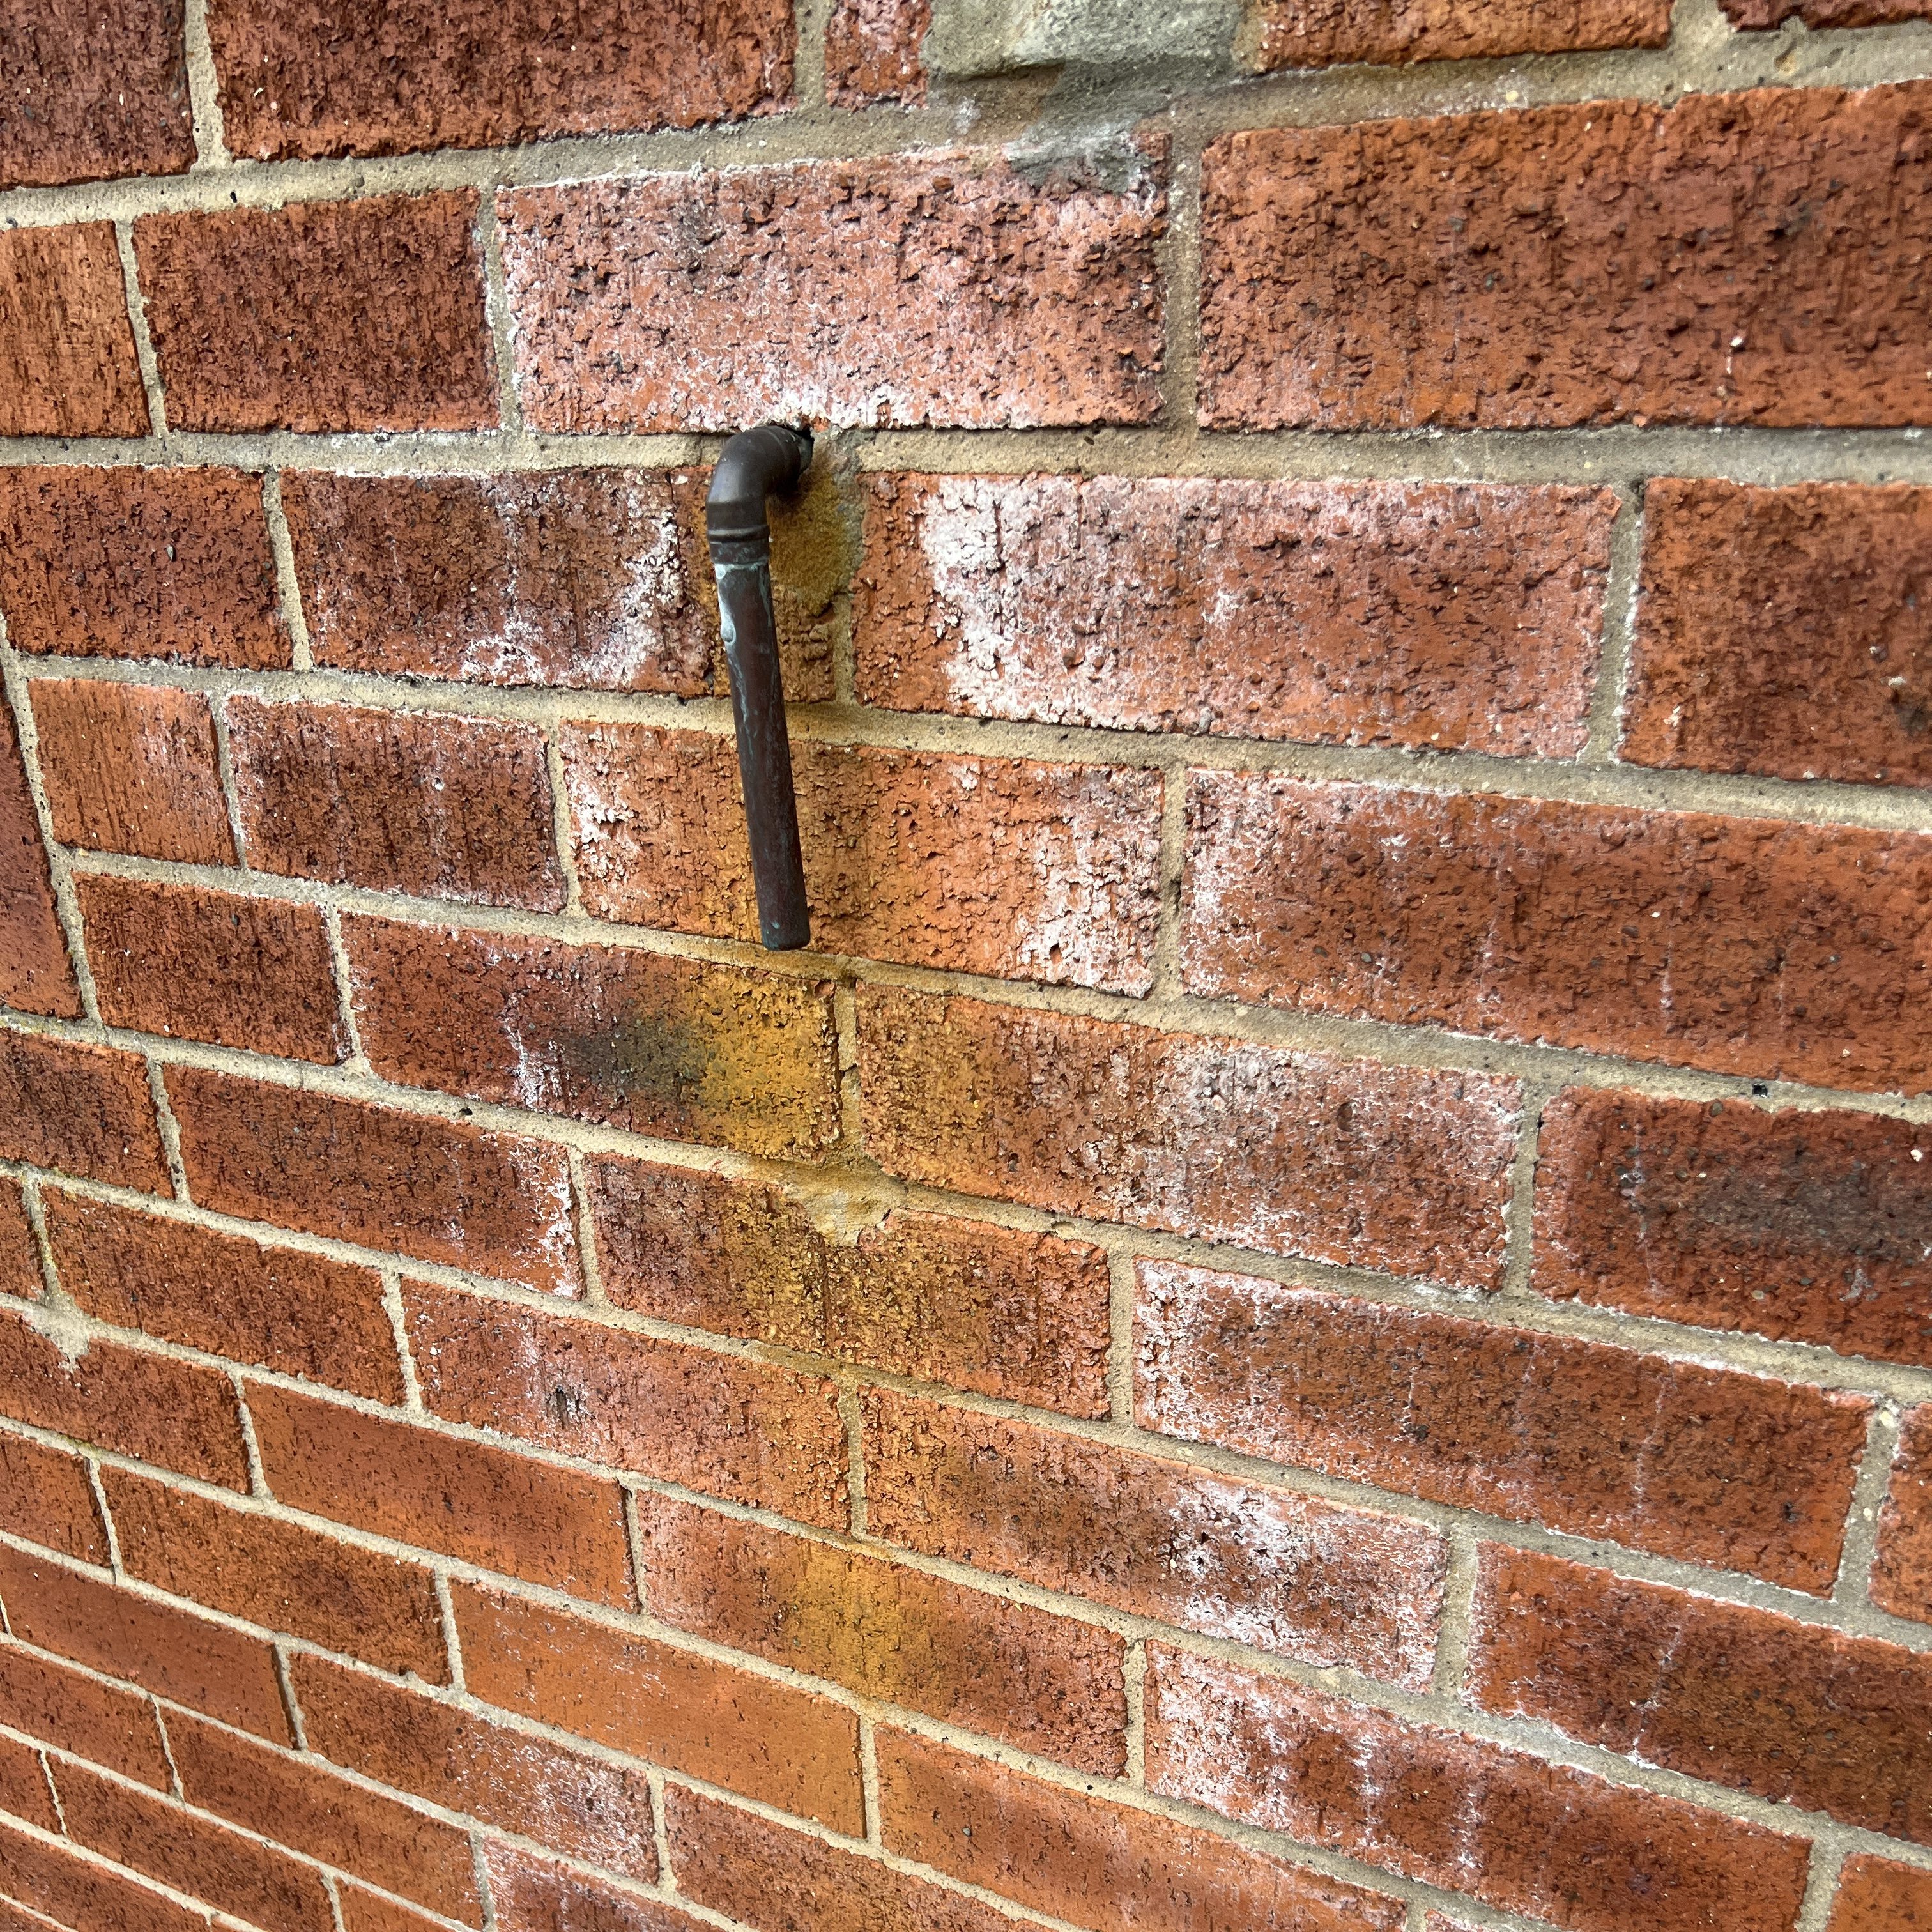 A leaking overflow pipe can be a sign of trouble with your boiler and plumbing.